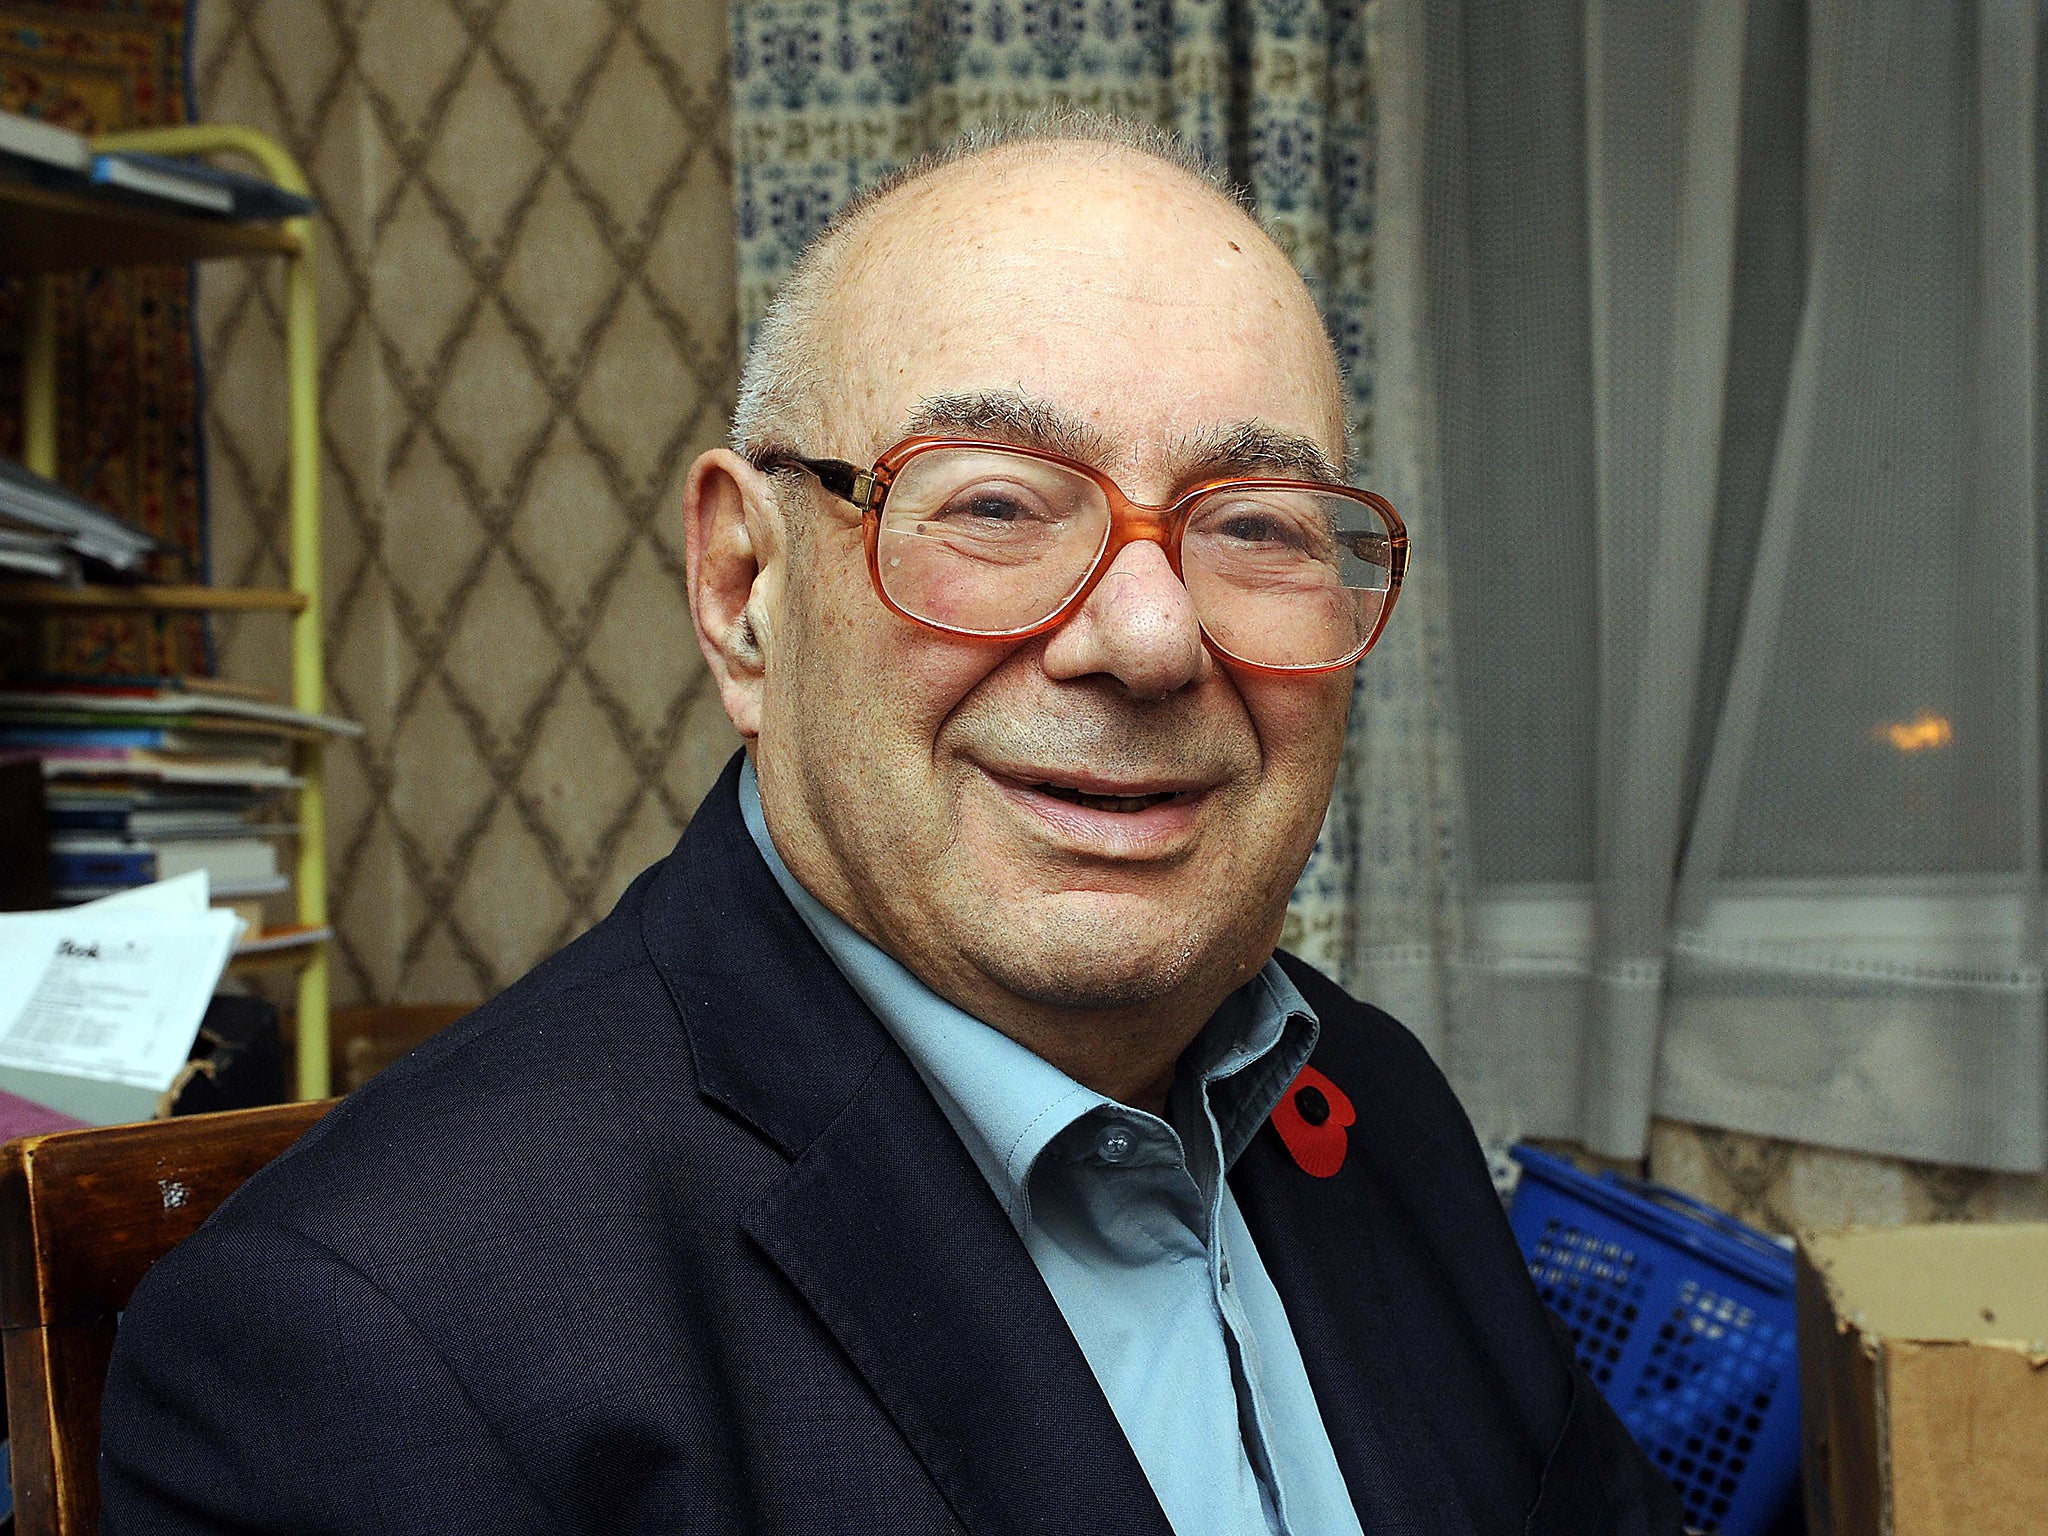 Rabbi Lionel Blue passed away this week at the age of 86